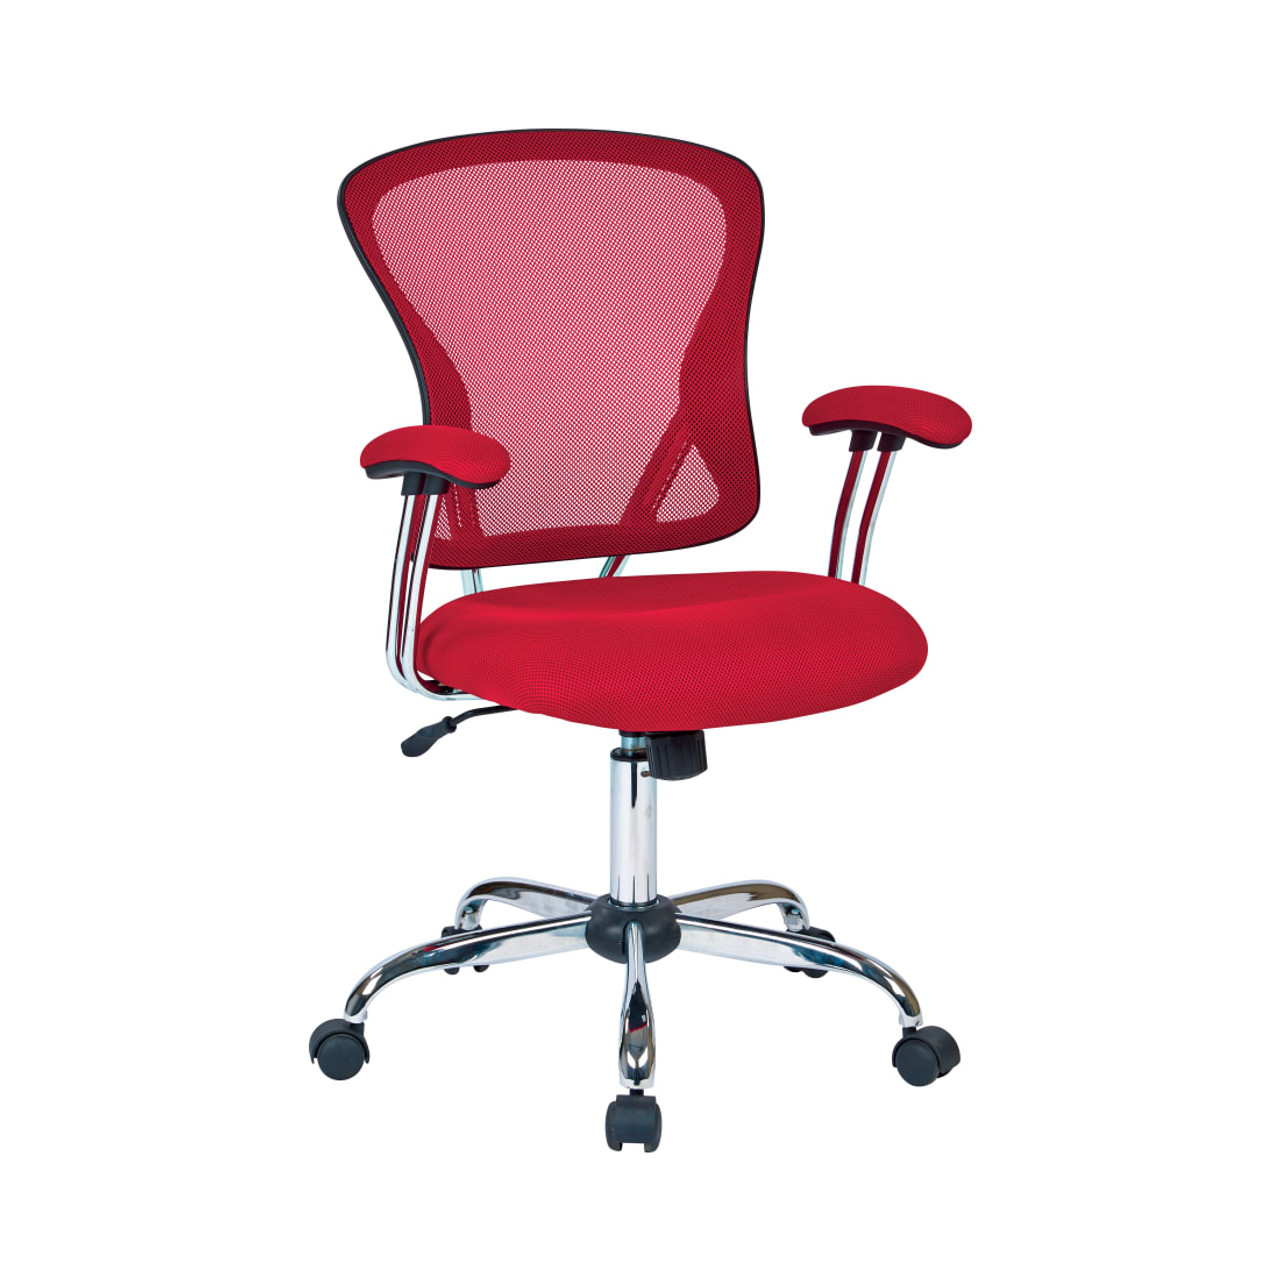 Juliana Task Chair with Red Mesh Fabric Seat